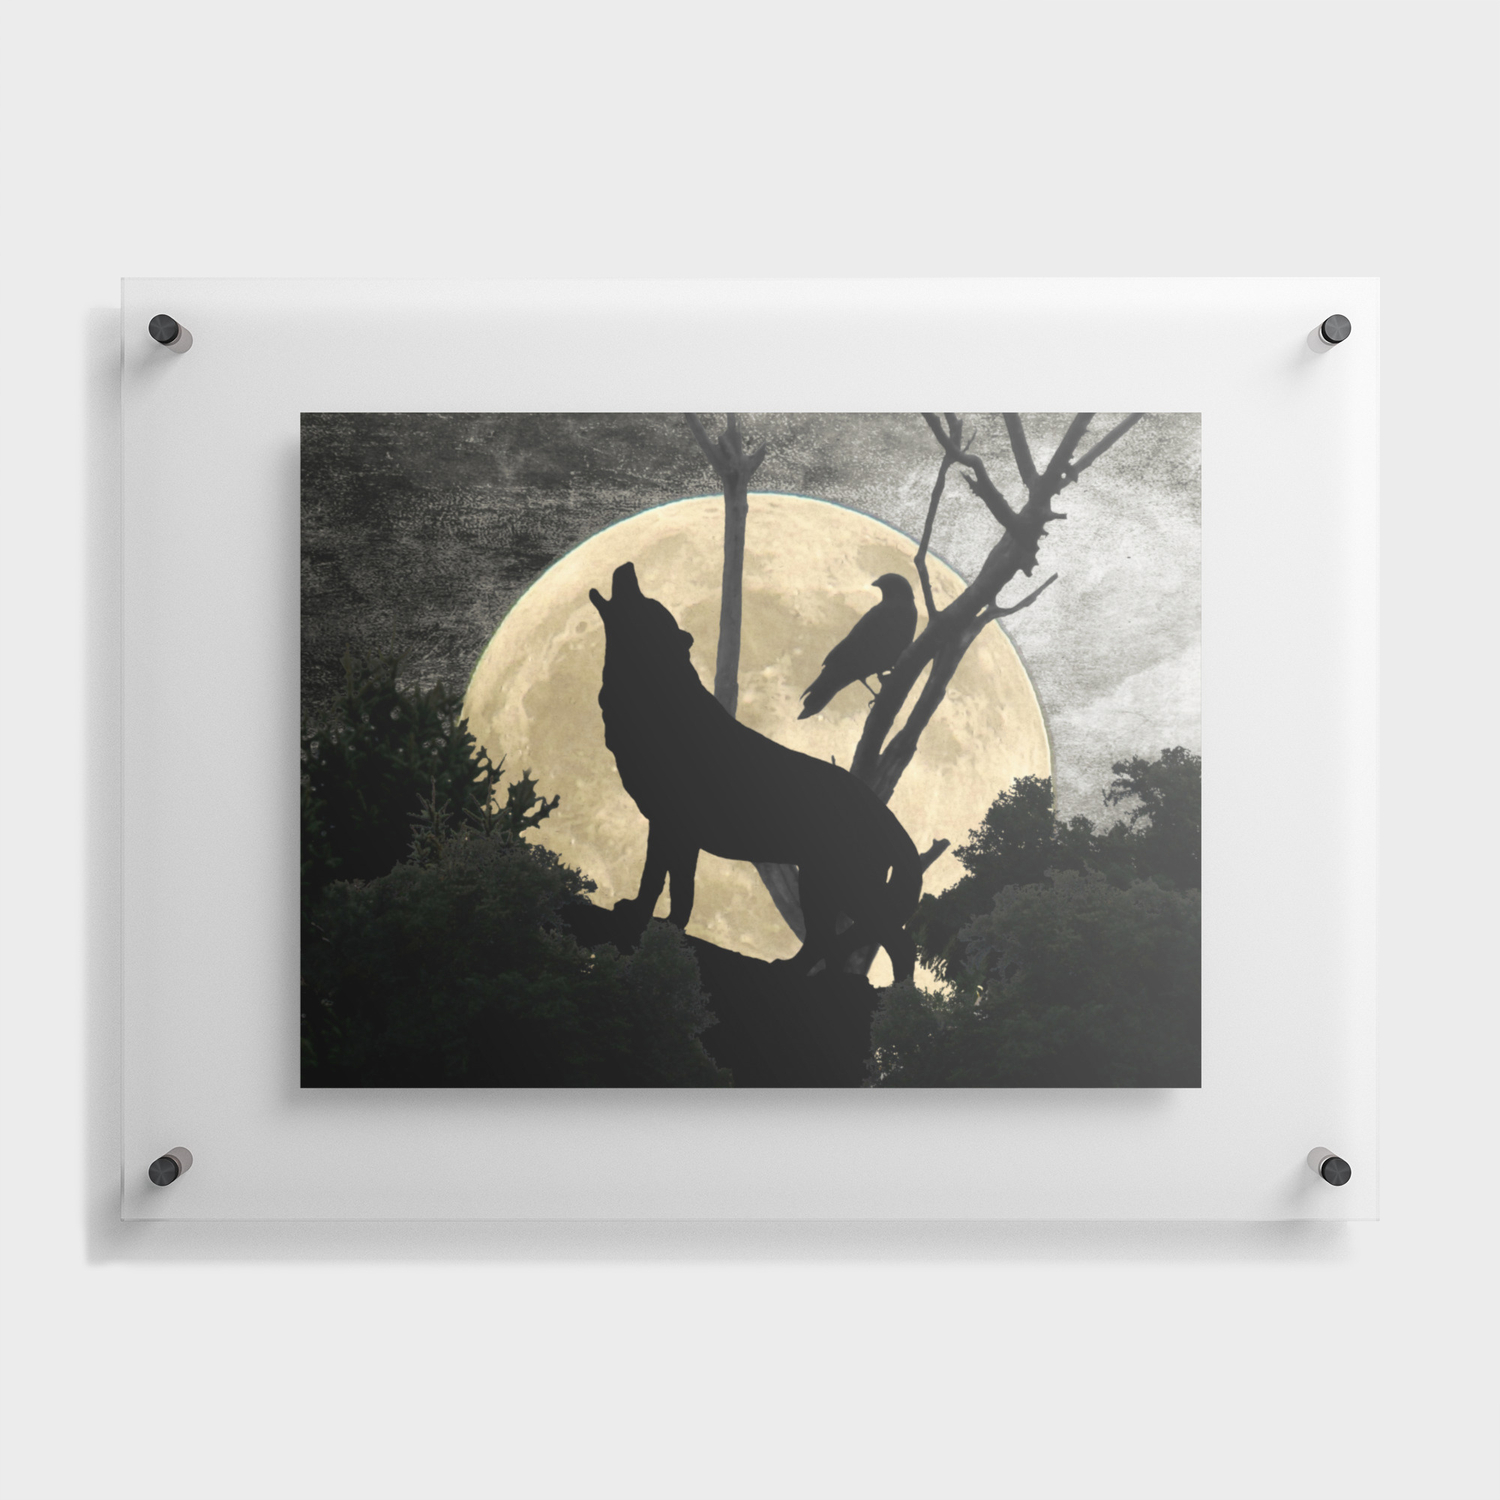 Howling Wolf Crow Moon Animal Black Bird Silhouette Art A388 Floating  Acrylic Print by Rusted Crow and Oak Studio | Society6